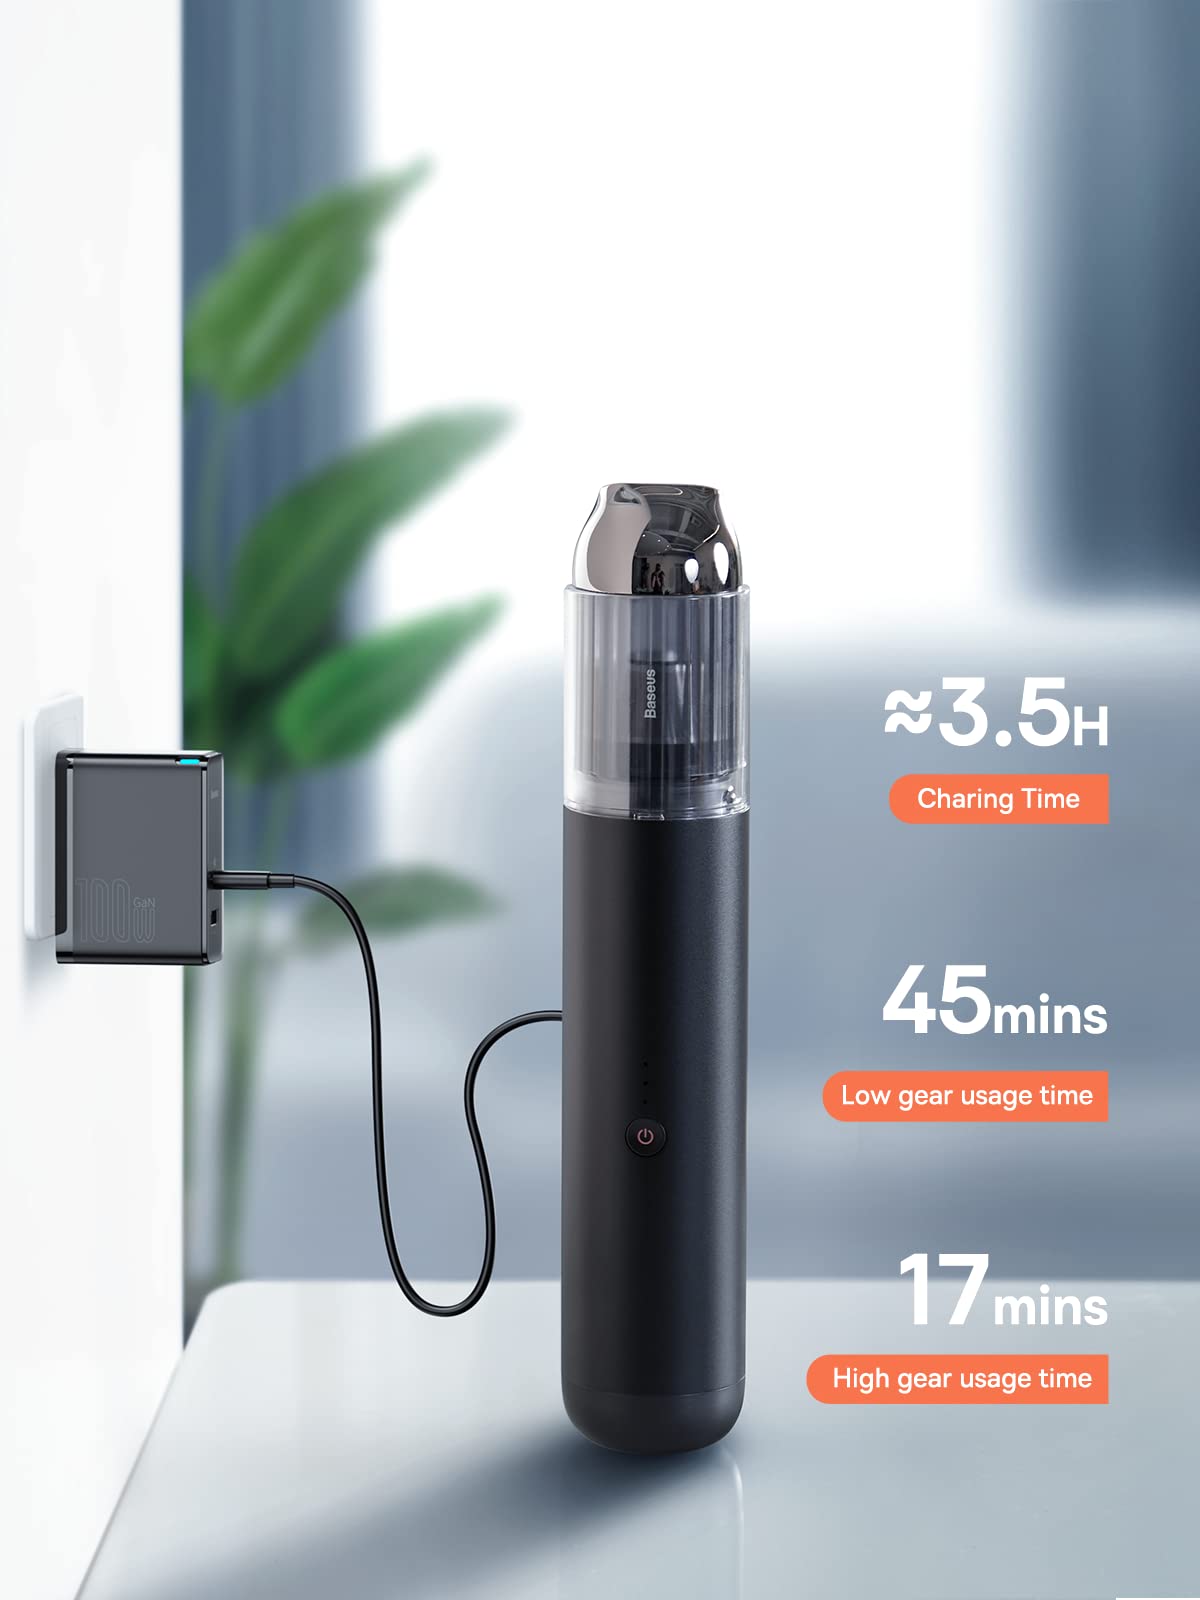 A3 Cordless Vacuum Cleaner by BASEUS